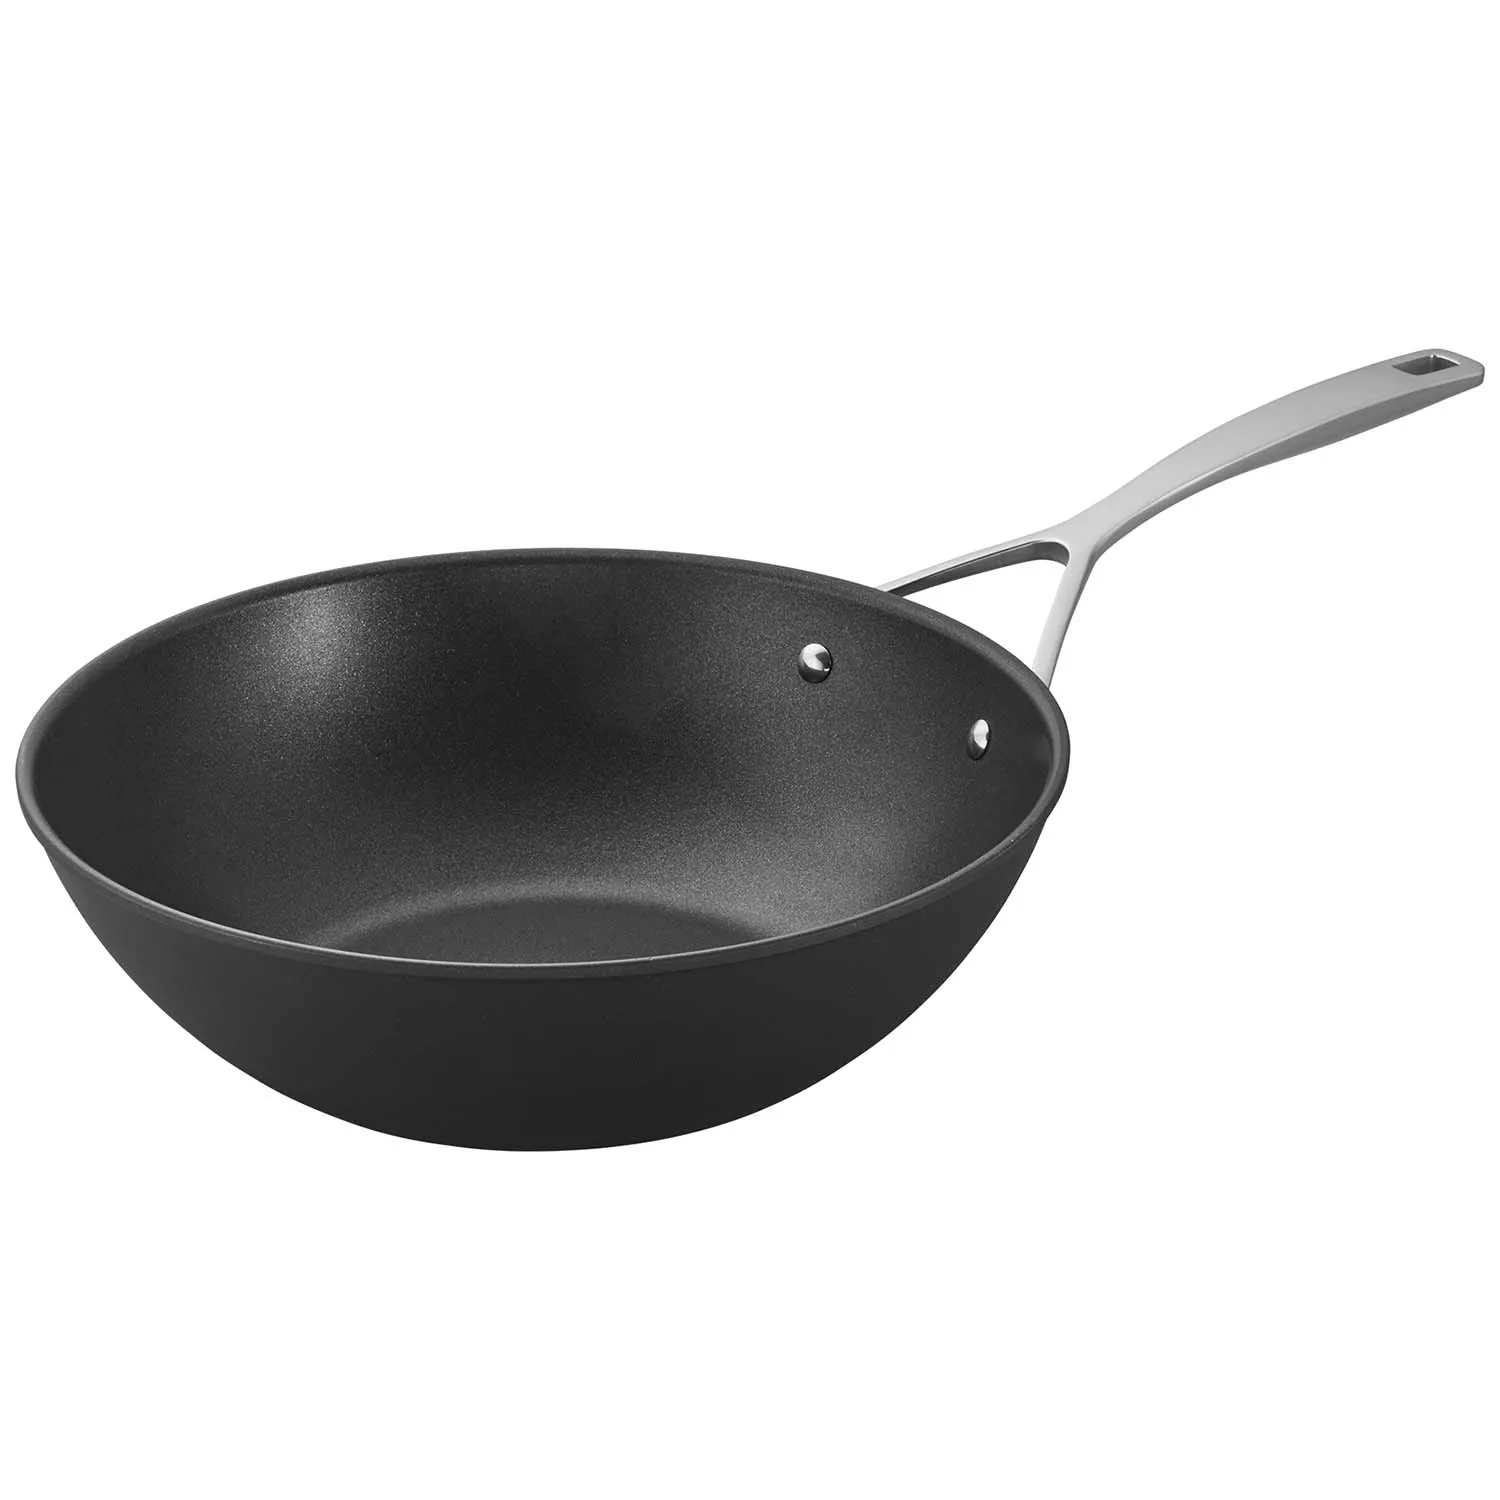 Demeyere AluPro Nonstick Fry Pan - 8 – Cutlery and More